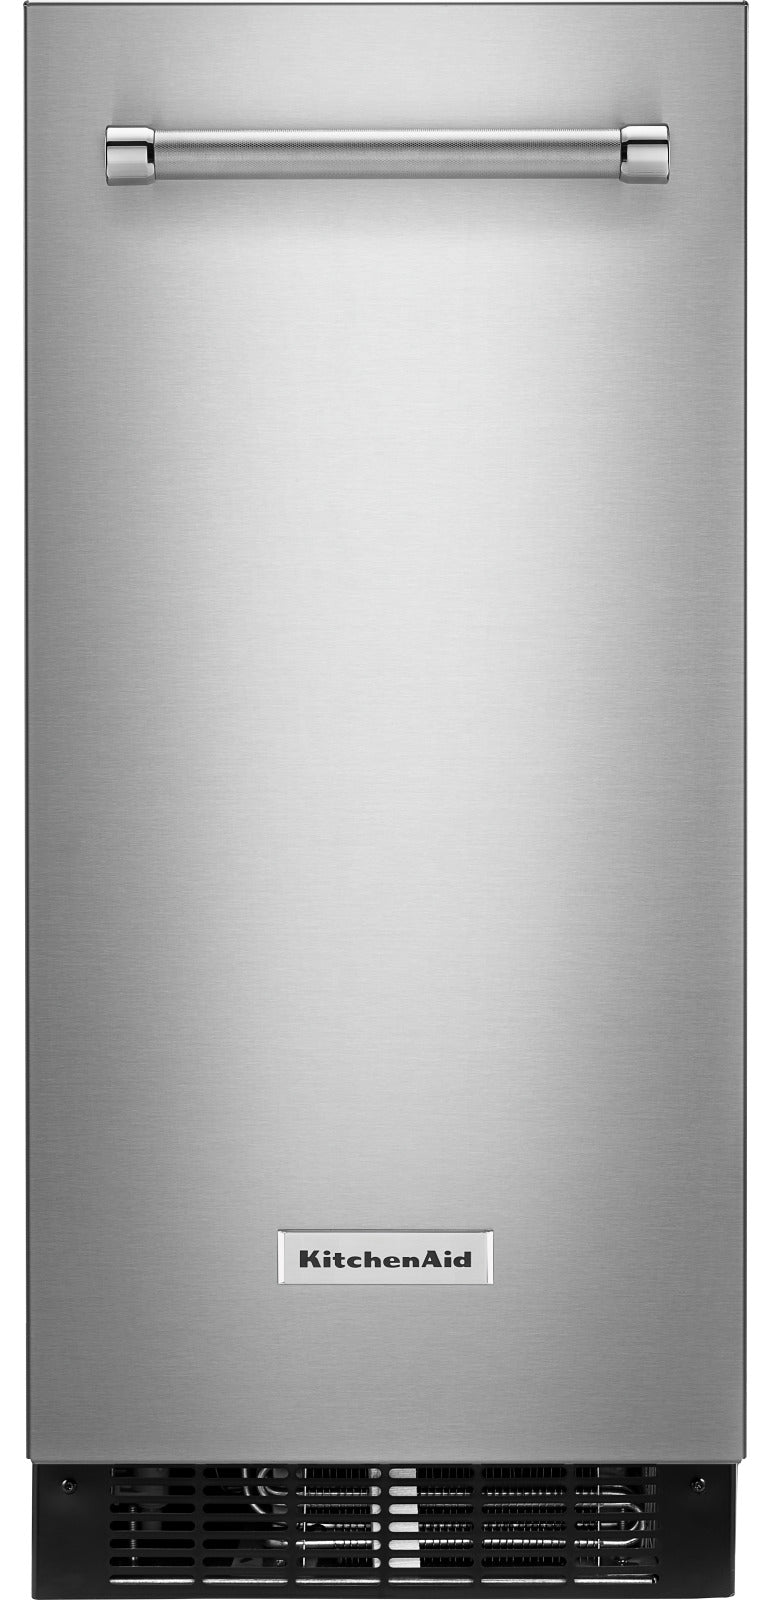 KitchenAid 15" Automatic Ice Maker - KUIX335HPS - Ice Maker in Stainless Steel with PrintShield™ Finish